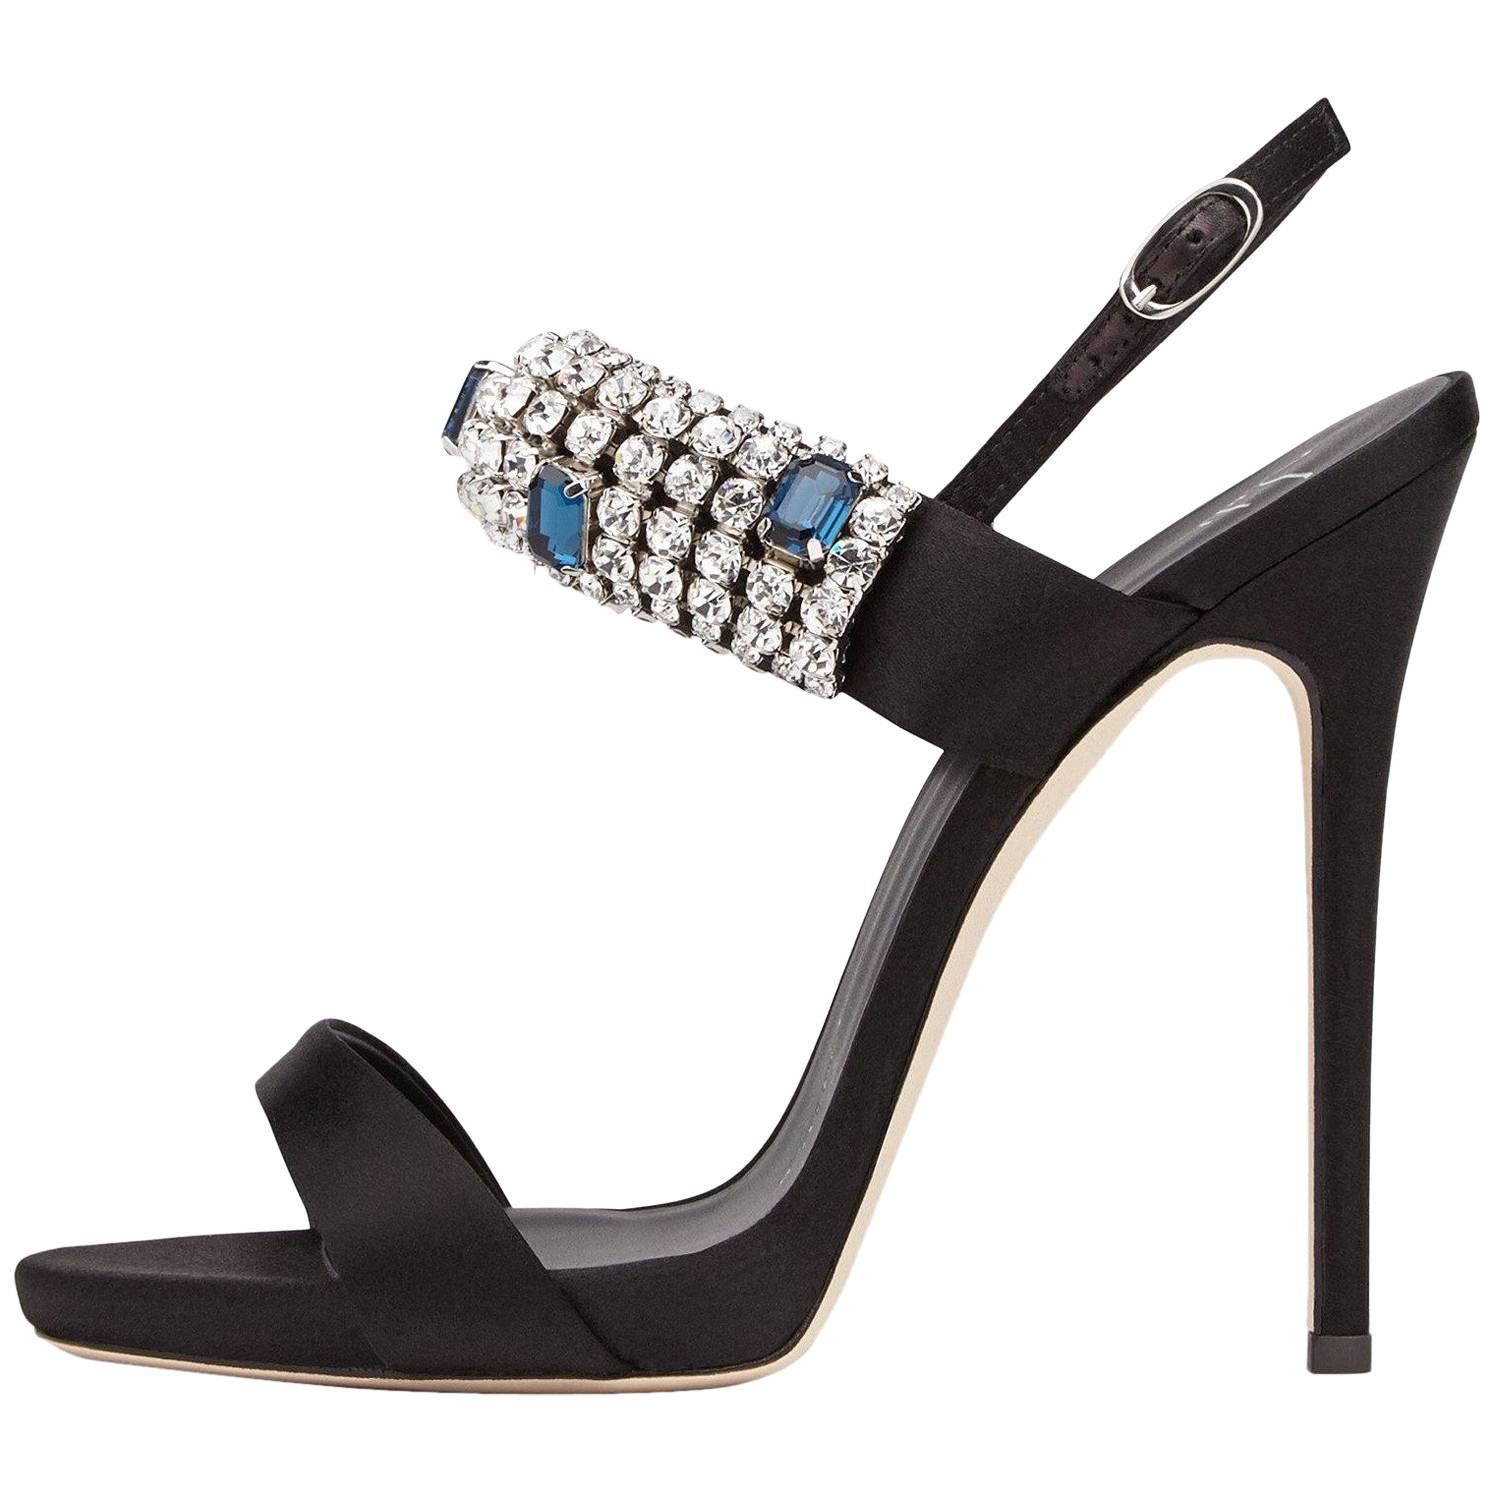 Giuseppe Zanotti New Sold Out Black Suede Crystal Evening Sandals Heels in Box